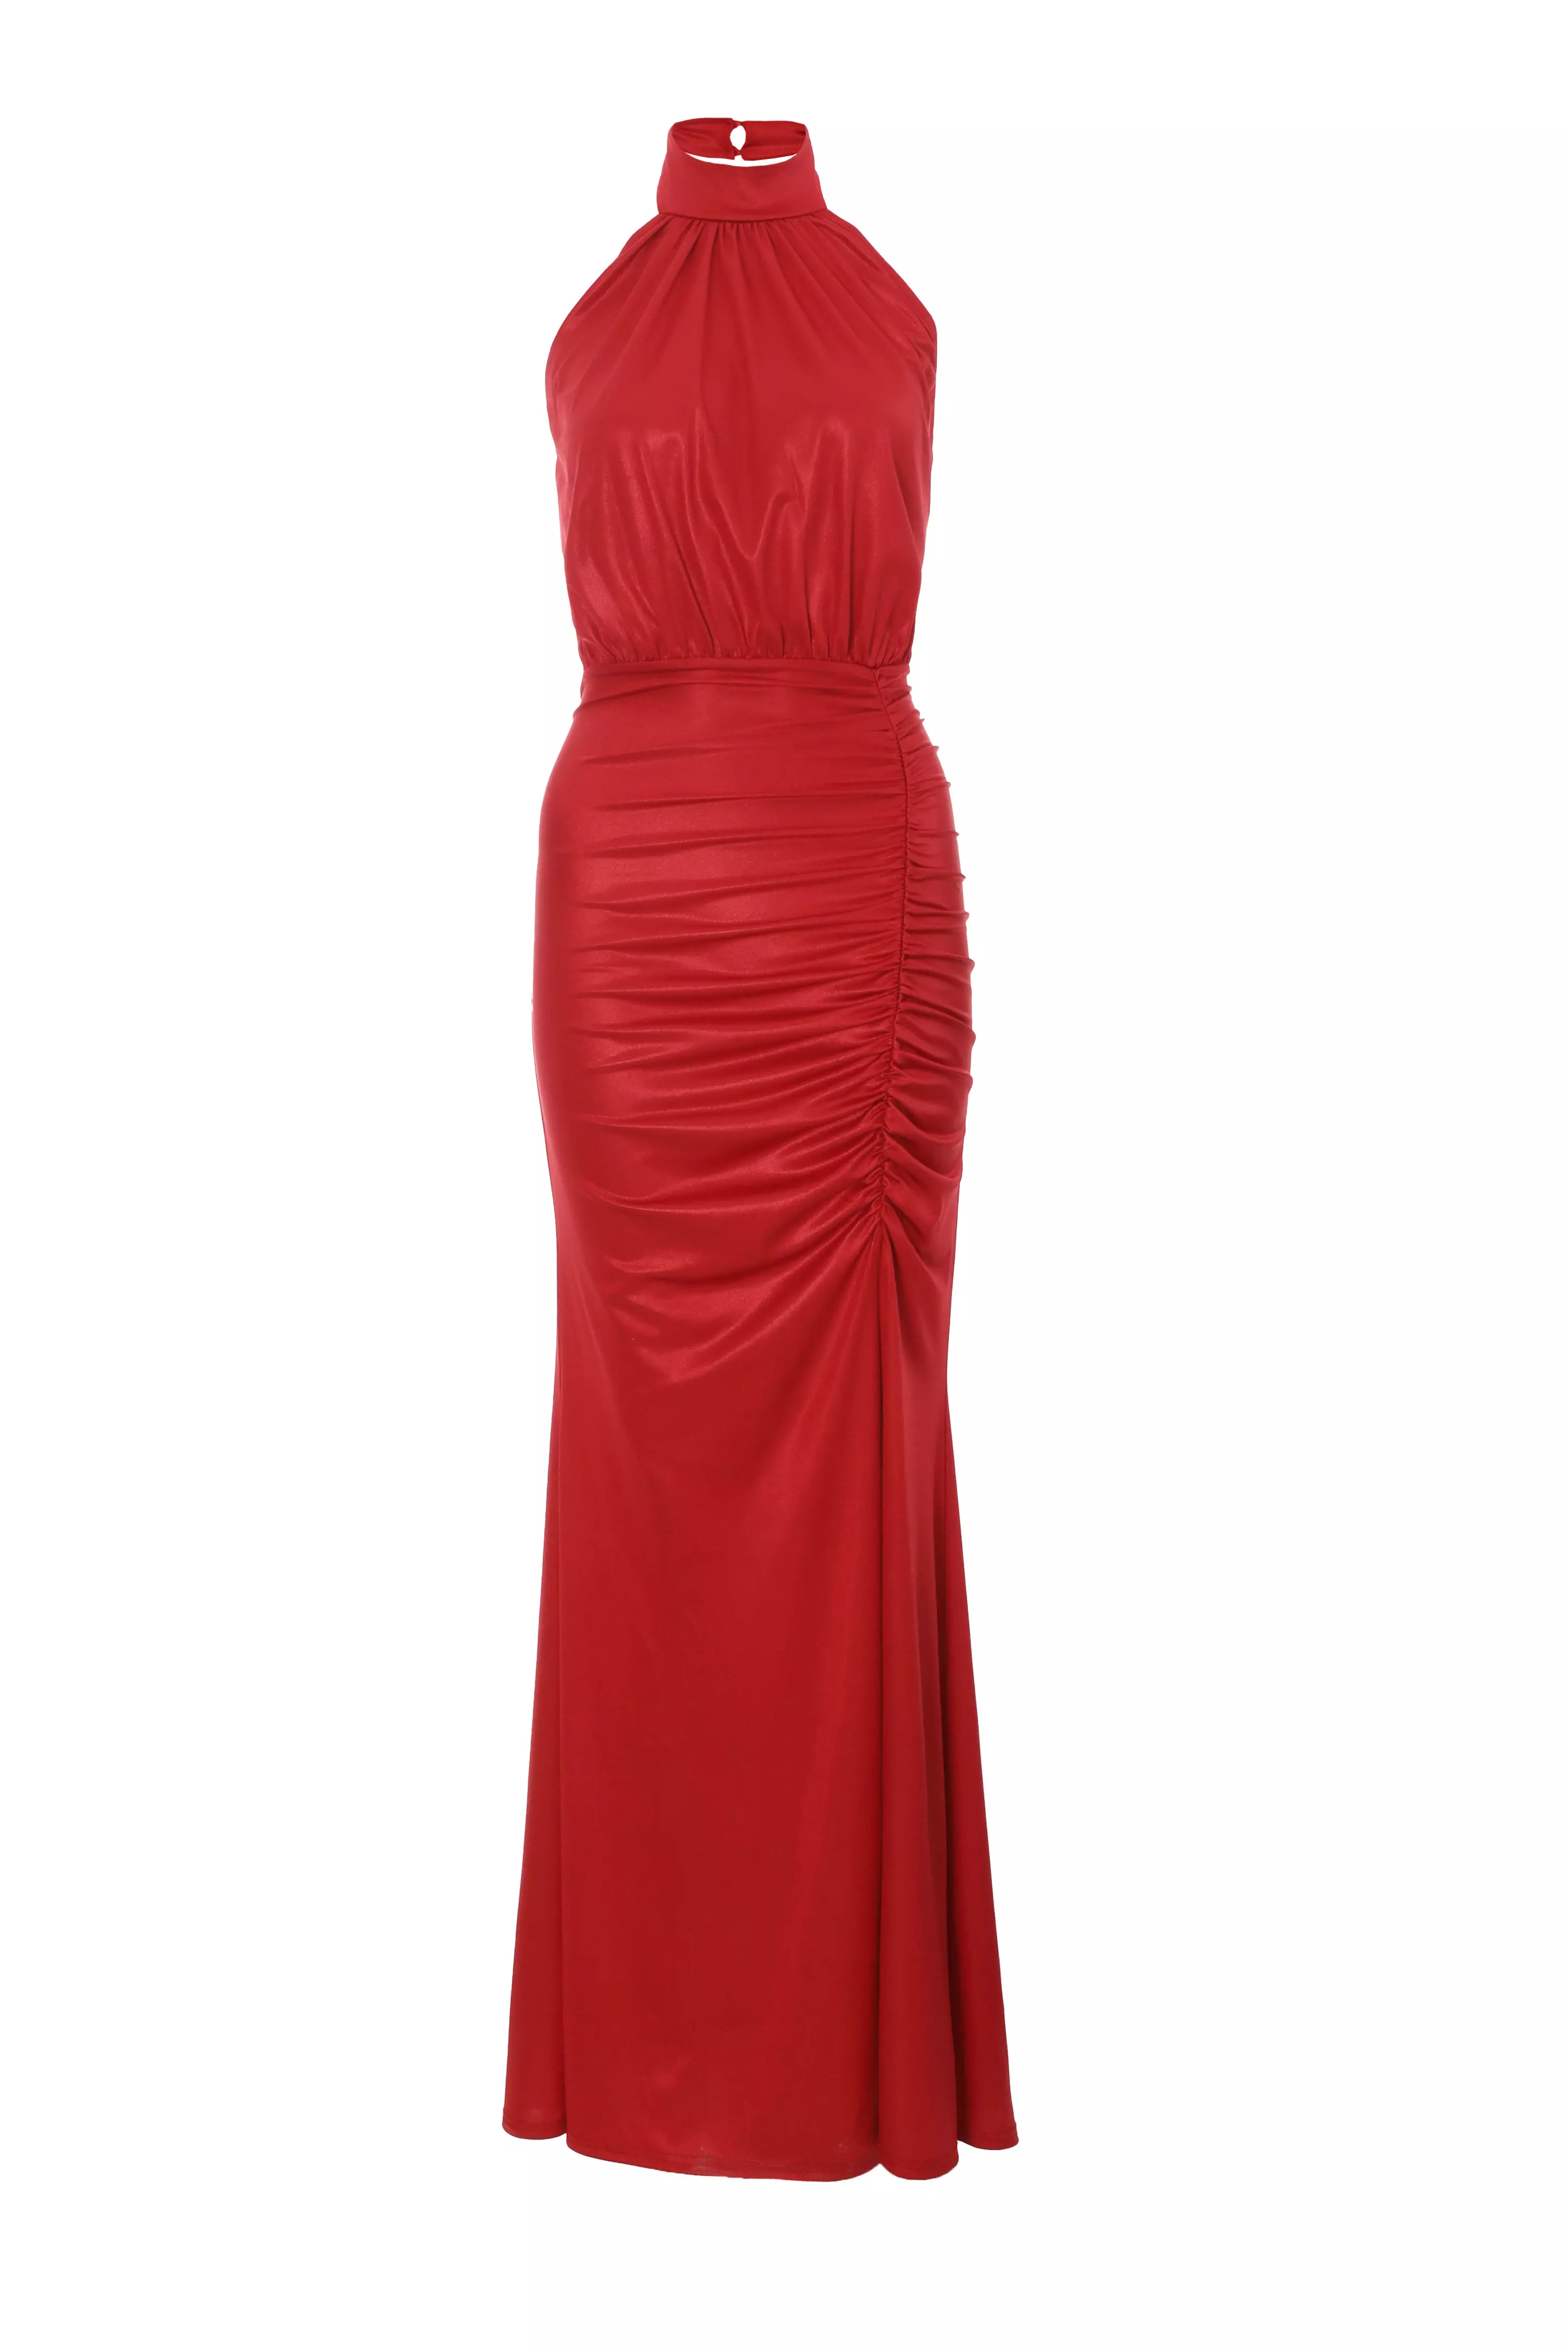 Red Halter Neck Ruched Maxi Dress - QUIZ Clothing